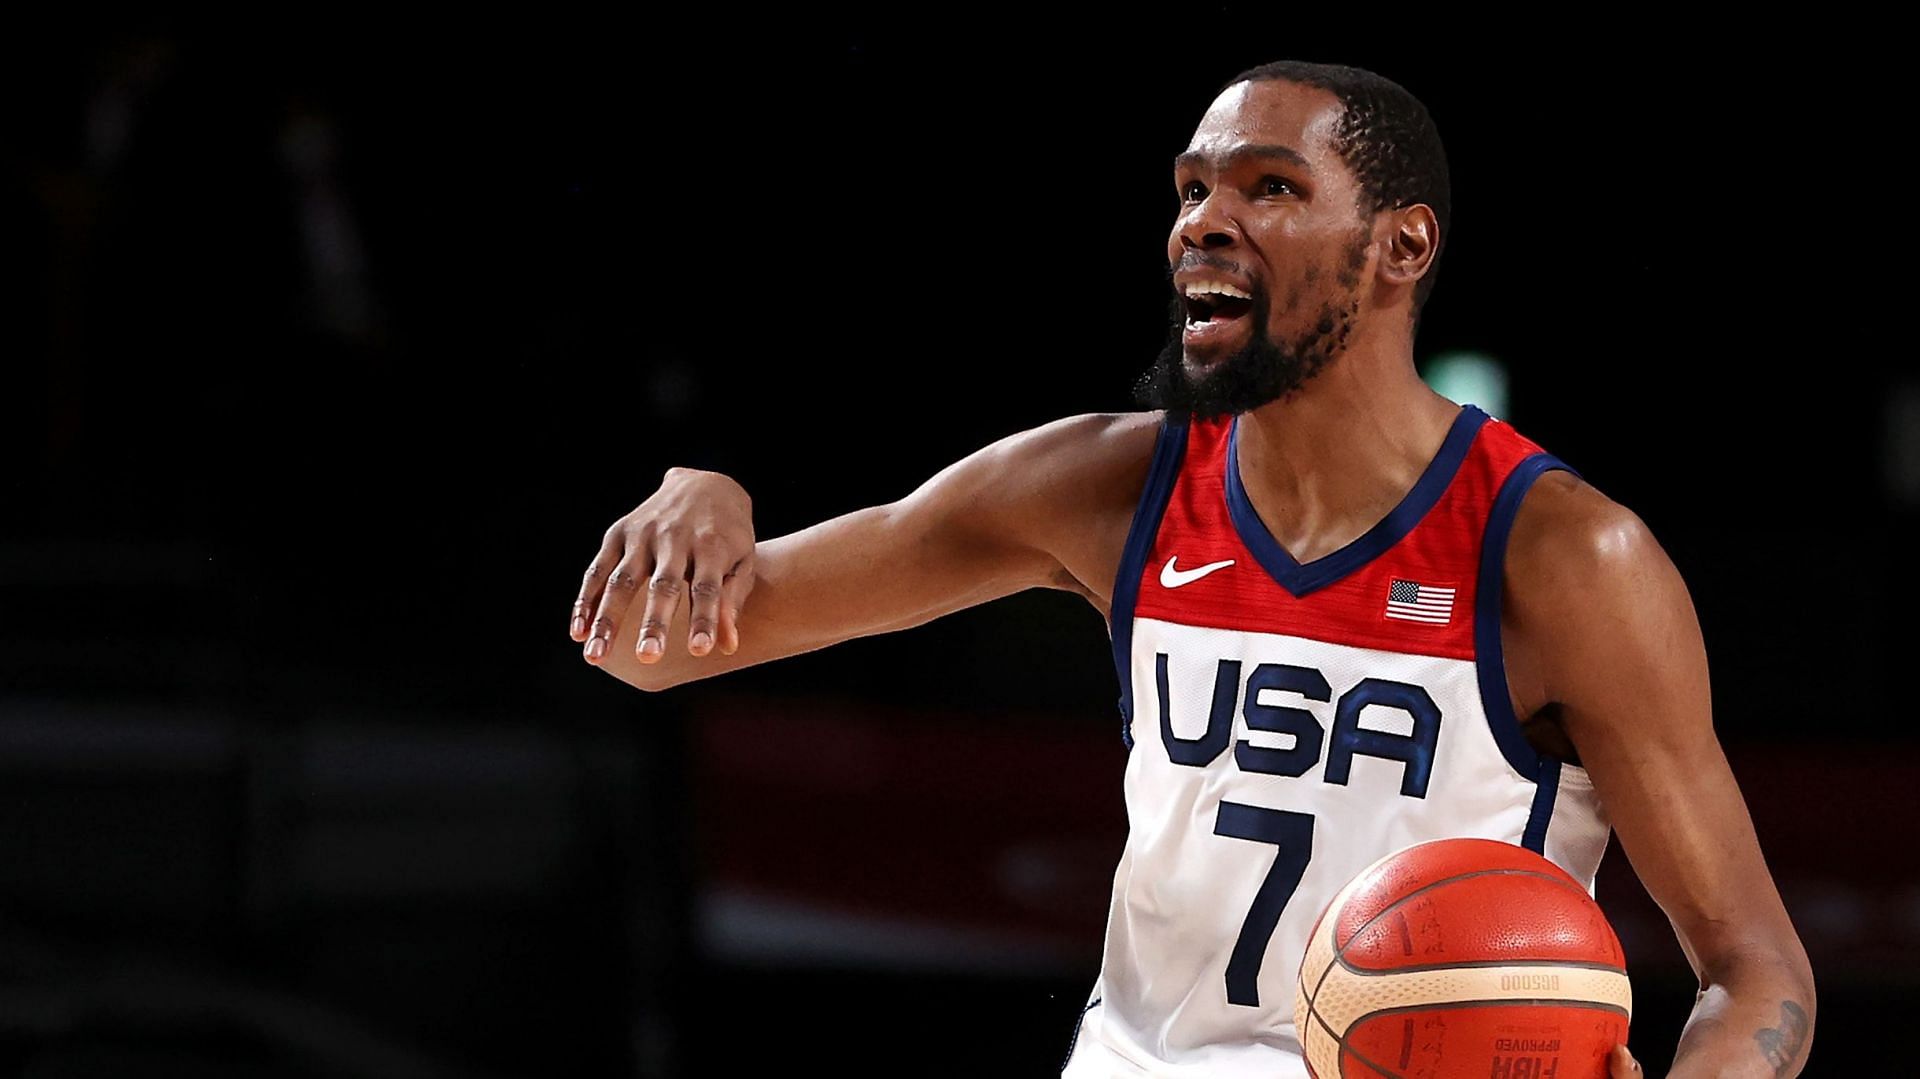 Kevin Durant playing for Team USA (Photo: Olympics.com)